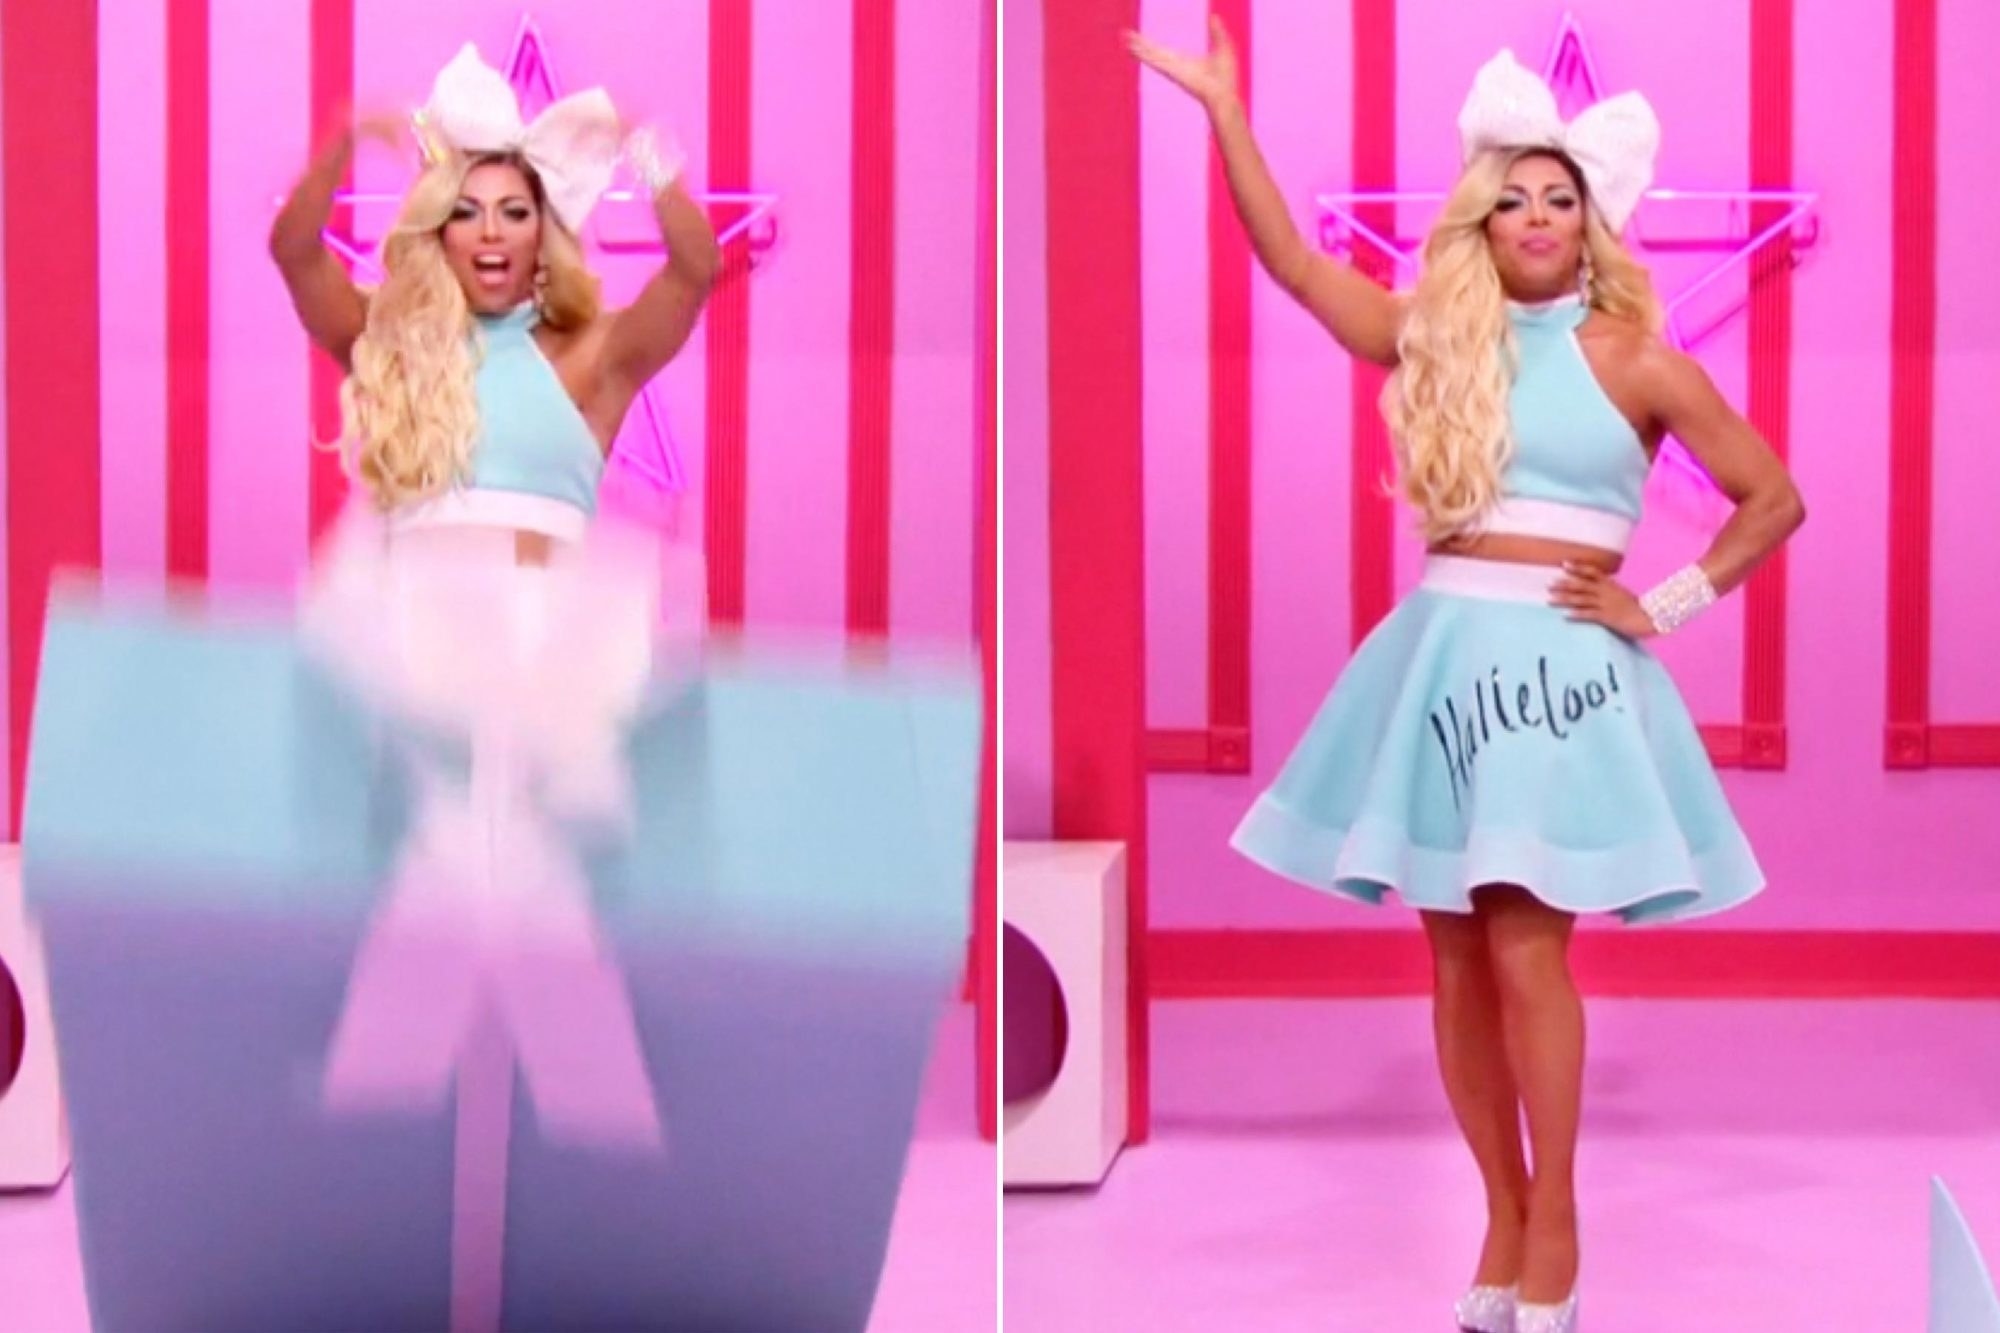 Drag queen Shangela emerges from a giant gift box wearing a turquoise top and poodle skirt with &quot;Halleloo!&quot; written on the skirt